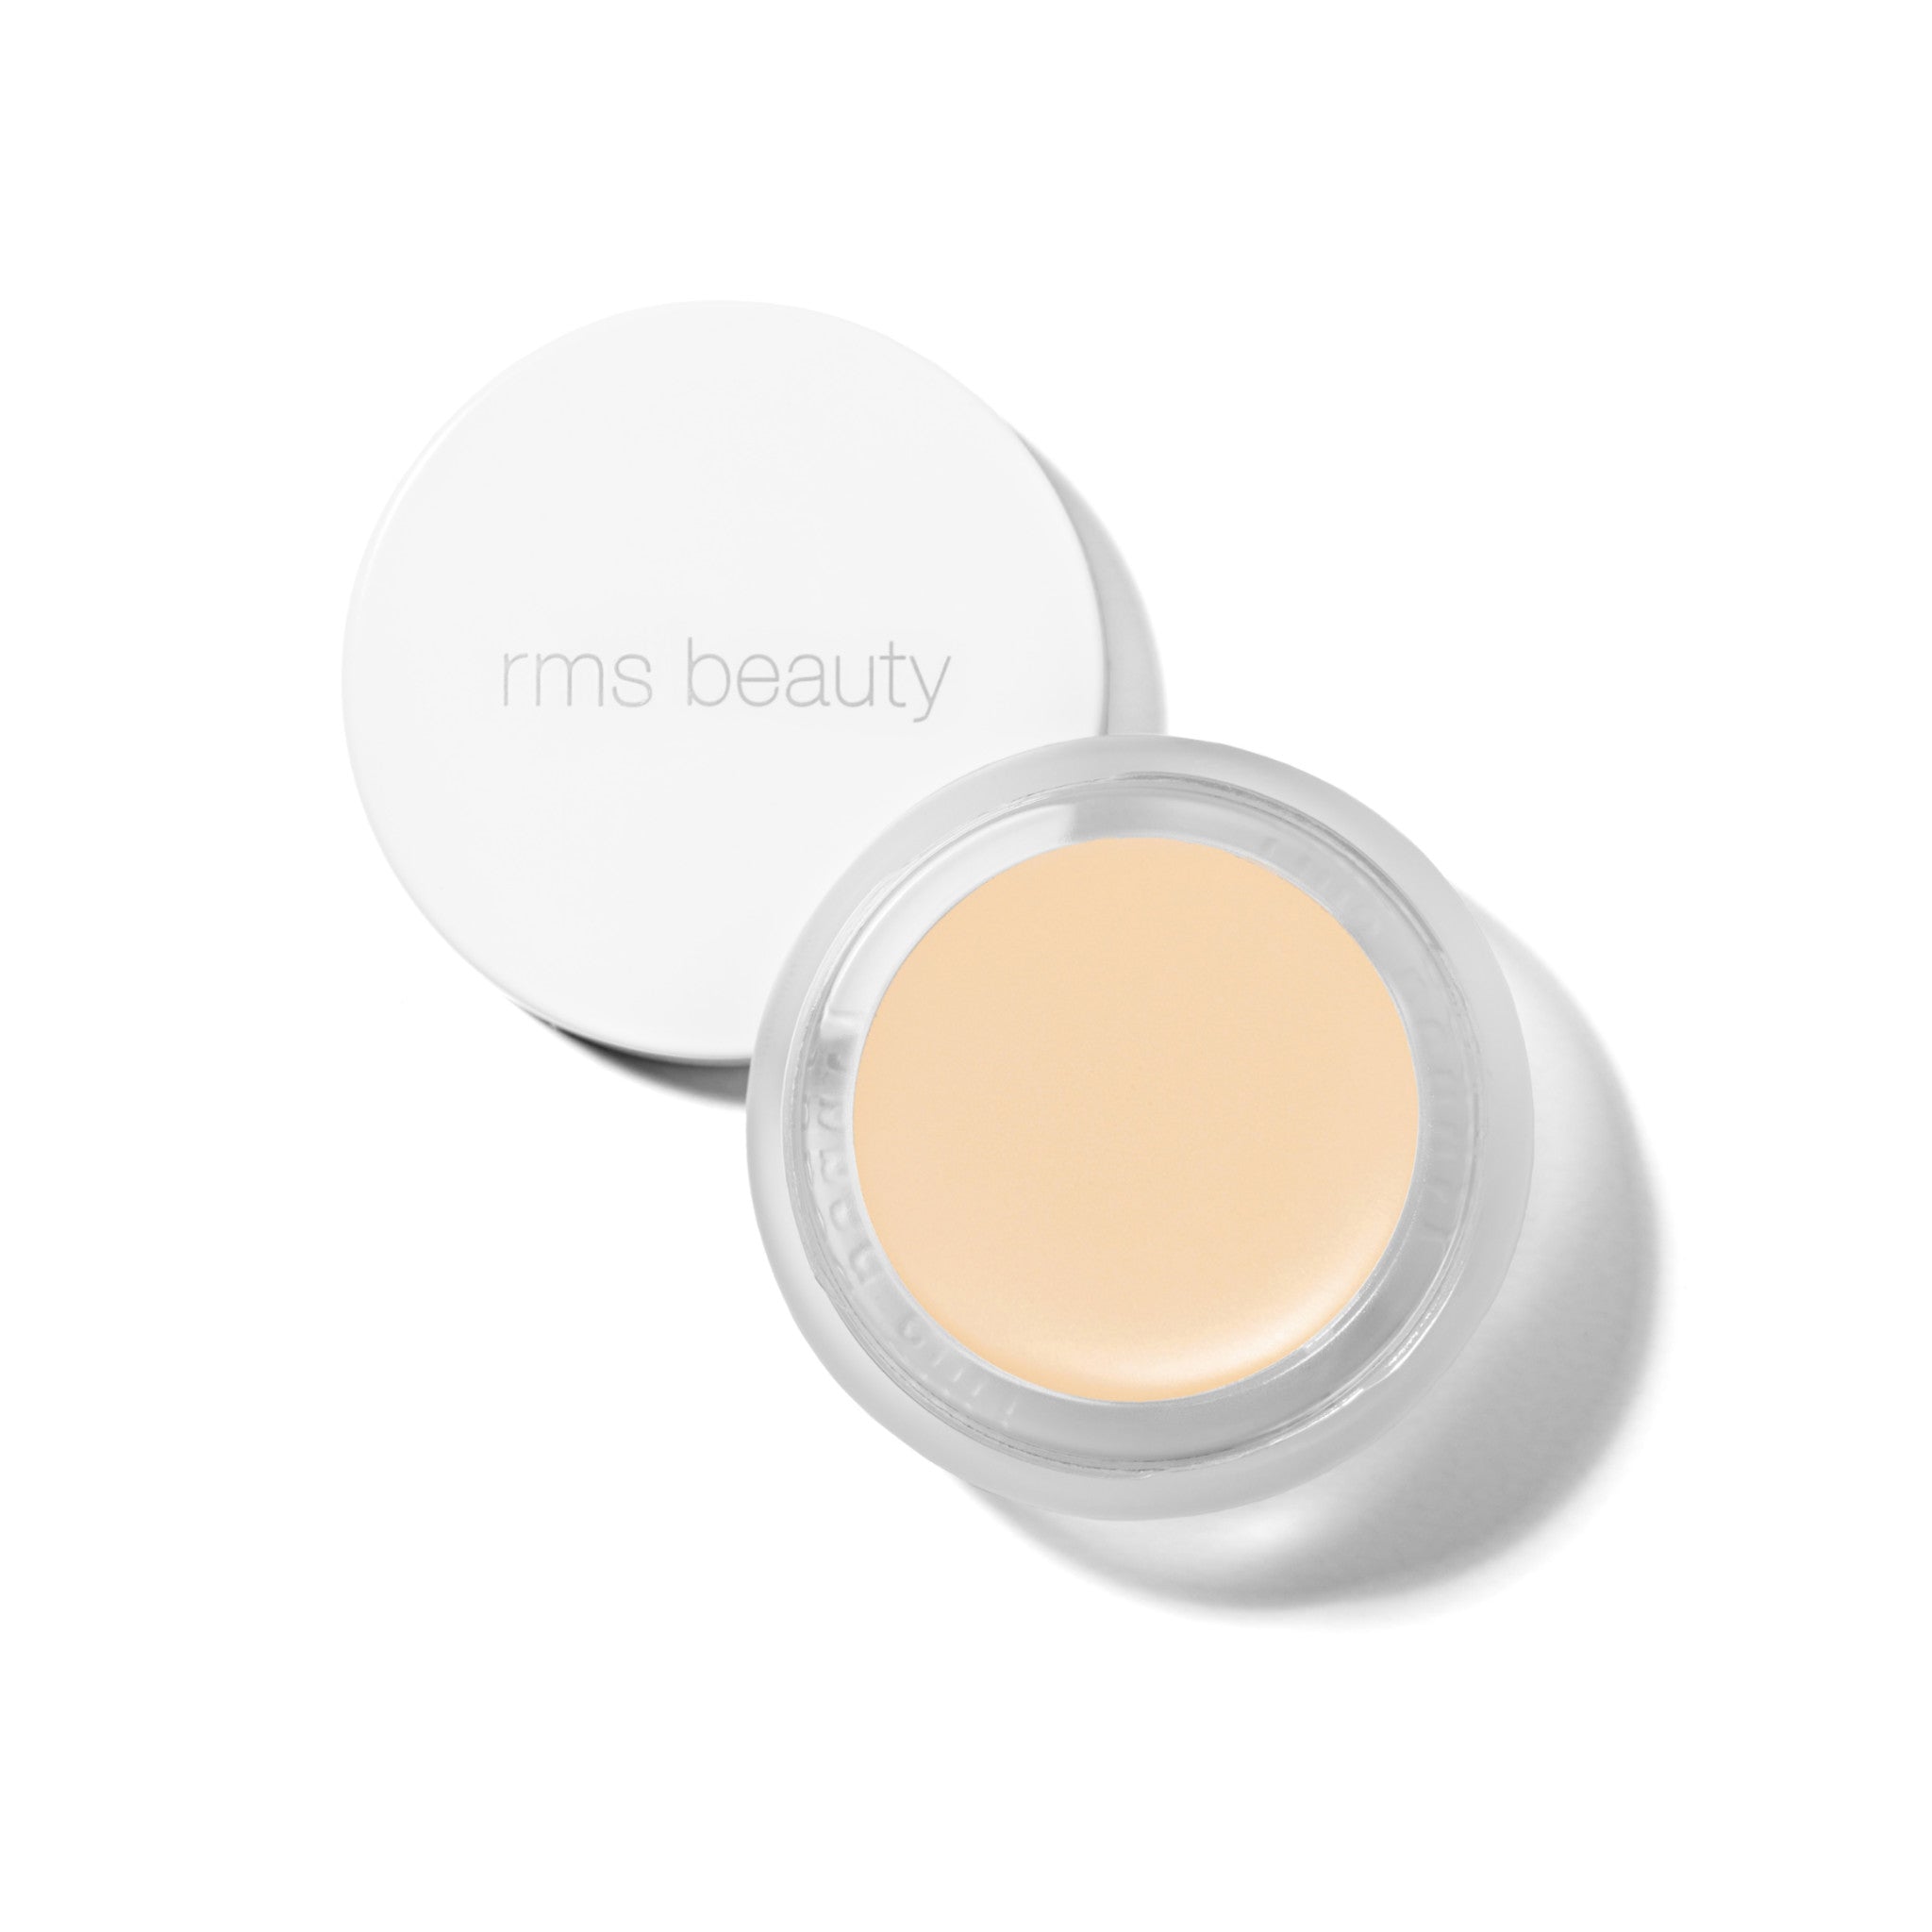 RMS Beauty UnCoverup Concealer Color/Shade variant: 00 main image. This product is for light neutral peach complexions